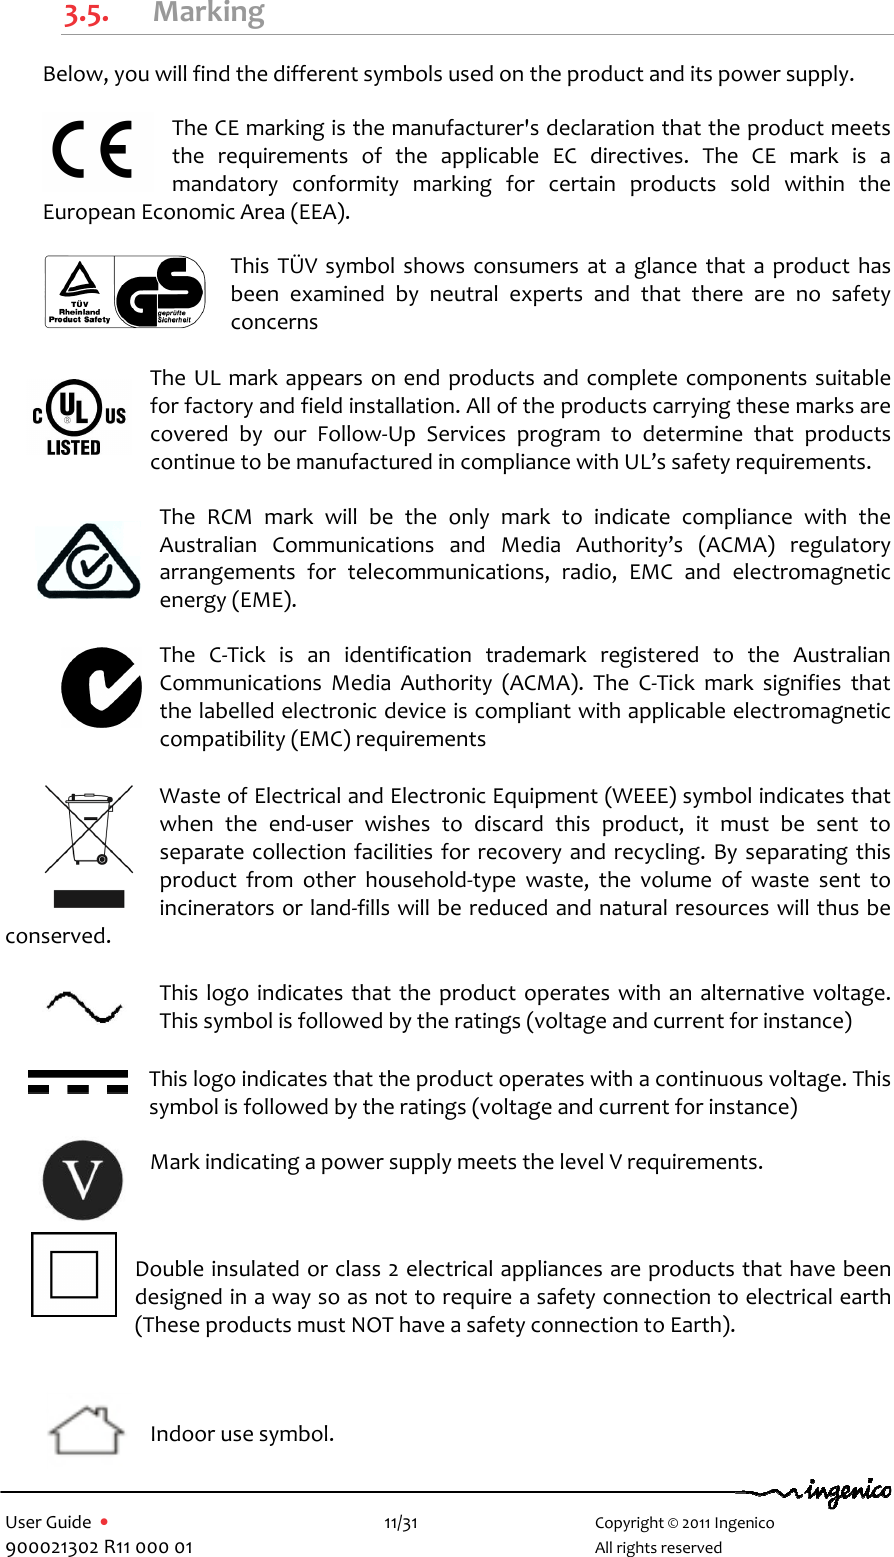   User Guide  •    11/31       Copyright © 2011 Ingenico 900021302 R11 000 01       All rights reserved   3.5. Marking Below, you will find the different symbols used on the product and its power supply.  The CE marking is the manufacturer&apos;s declaration that the product meets the  requirements  of  the  applicable  EC  directives.  The  CE  mark  is  a mandatory  conformity  marking  for  certain  products  sold  within  the European Economic Area (EEA).  This  TÜV symbol  shows  consumers at  a  glance  that a  product  has been  examined  by  neutral  experts  and  that  there  are  no  safety concerns  The UL mark appears on end  products and complete components suitable for factory and field installation. All of the products carrying these marks are covered  by  our  Follow-Up  Services  program  to  determine  that  products continue to be manufactured in compliance with UL’s safety requirements.  The  RCM  mark  will  be  the  only  mark  to  indicate  compliance  with  the Australian  Communications  and  Media  Authority’s  (ACMA)  regulatory arrangements  for  telecommunications,  radio,  EMC  and  electromagnetic energy (EME).  The  C-Tick  is  an  identification  trademark  registered  to  the  Australian Communications  Media  Authority  (ACMA).  The  C-Tick  mark  signifies  that the labelled electronic device is compliant with applicable electromagnetic compatibility (EMC) requirements Waste of Electrical and Electronic Equipment (WEEE) symbol indicates that when  the  end-user  wishes  to  discard  this  product,  it  must  be  sent  to separate collection facilities for recovery and recycling. By separating this product  from  other  household-type  waste,  the  volume  of  waste  sent  to incinerators or land-fills will be reduced and natural resources will thus be conserved. This logo indicates that the product operates with an alternative voltage. This symbol is followed by the ratings (voltage and current for instance)  This logo indicates that the product operates with a continuous voltage. This symbol is followed by the ratings (voltage and current for instance)  Mark indicating a power supply meets the level V requirements.  Double insulated or class 2 electrical appliances are products that have been designed in a way so as not to require a safety connection to electrical earth (These products must NOT have a safety connection to Earth).   Indoor use symbol. 